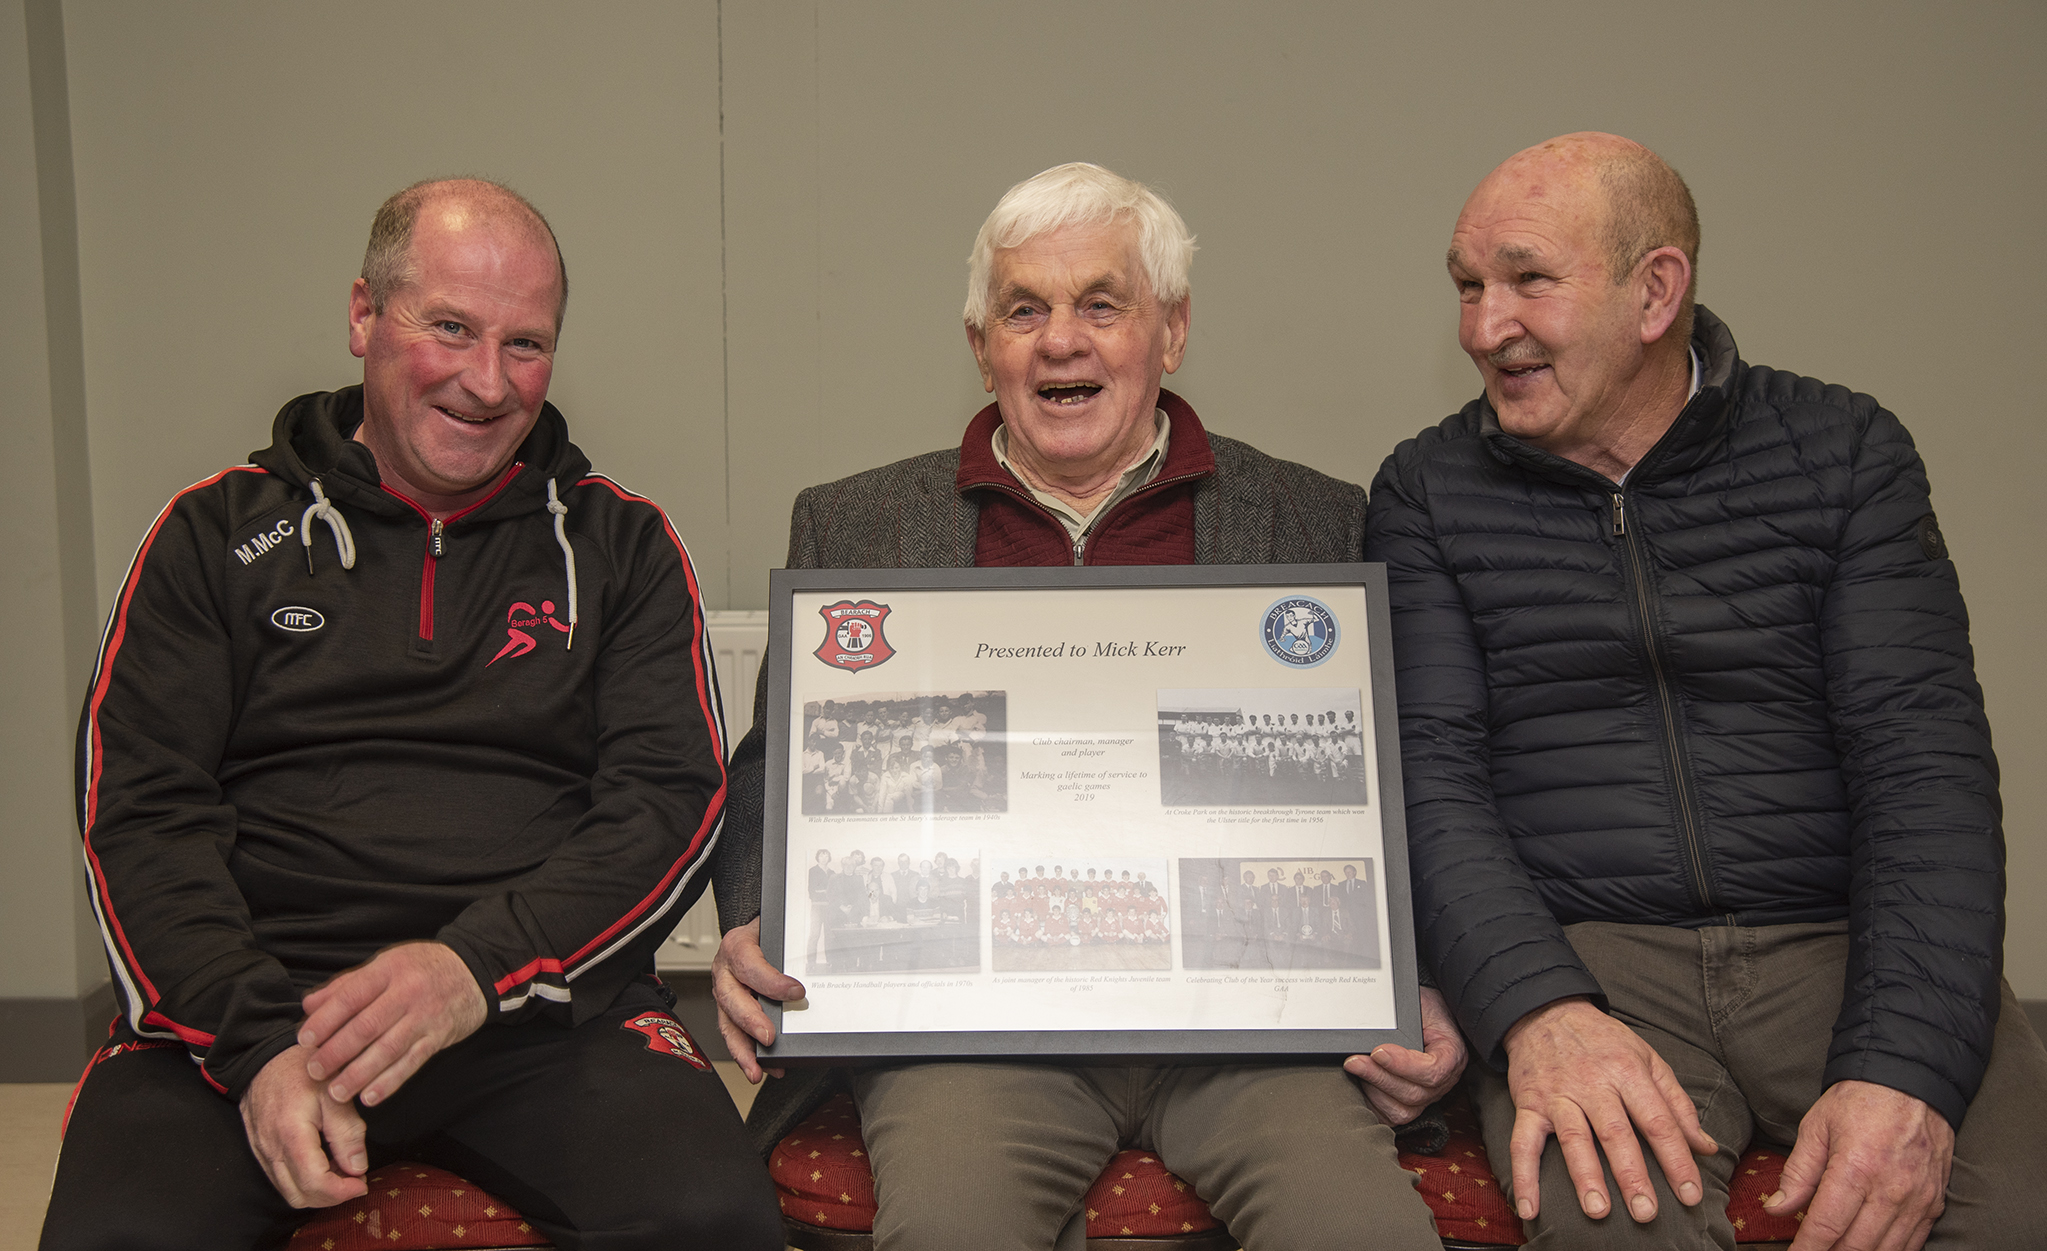 Mick Kerr honoured at special Red Knights function